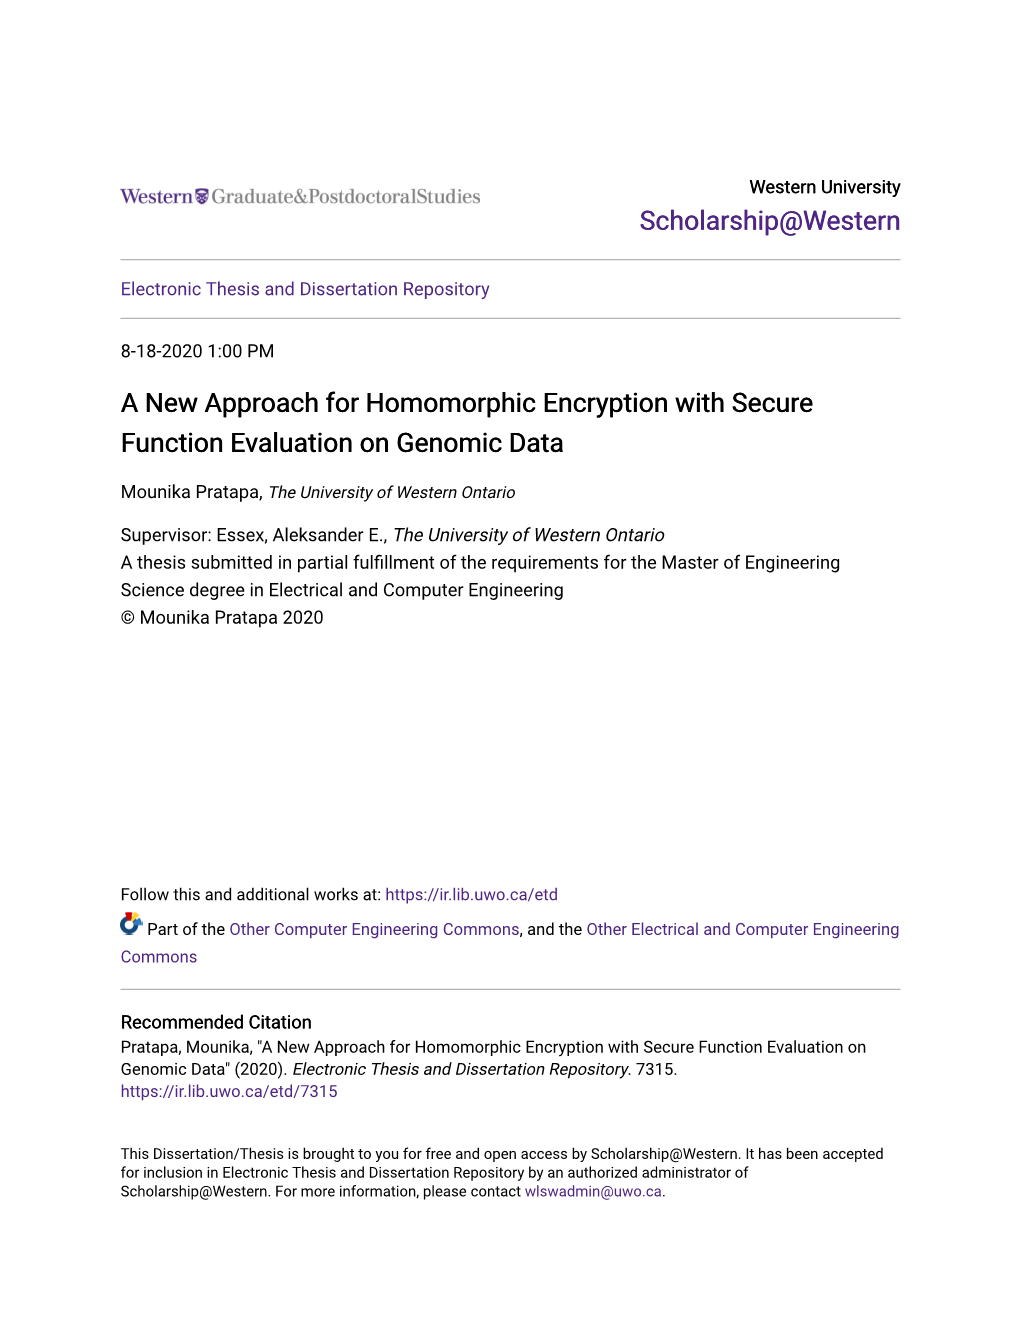 A New Approach for Homomorphic Encryption with Secure Function Evaluation on Genomic Data